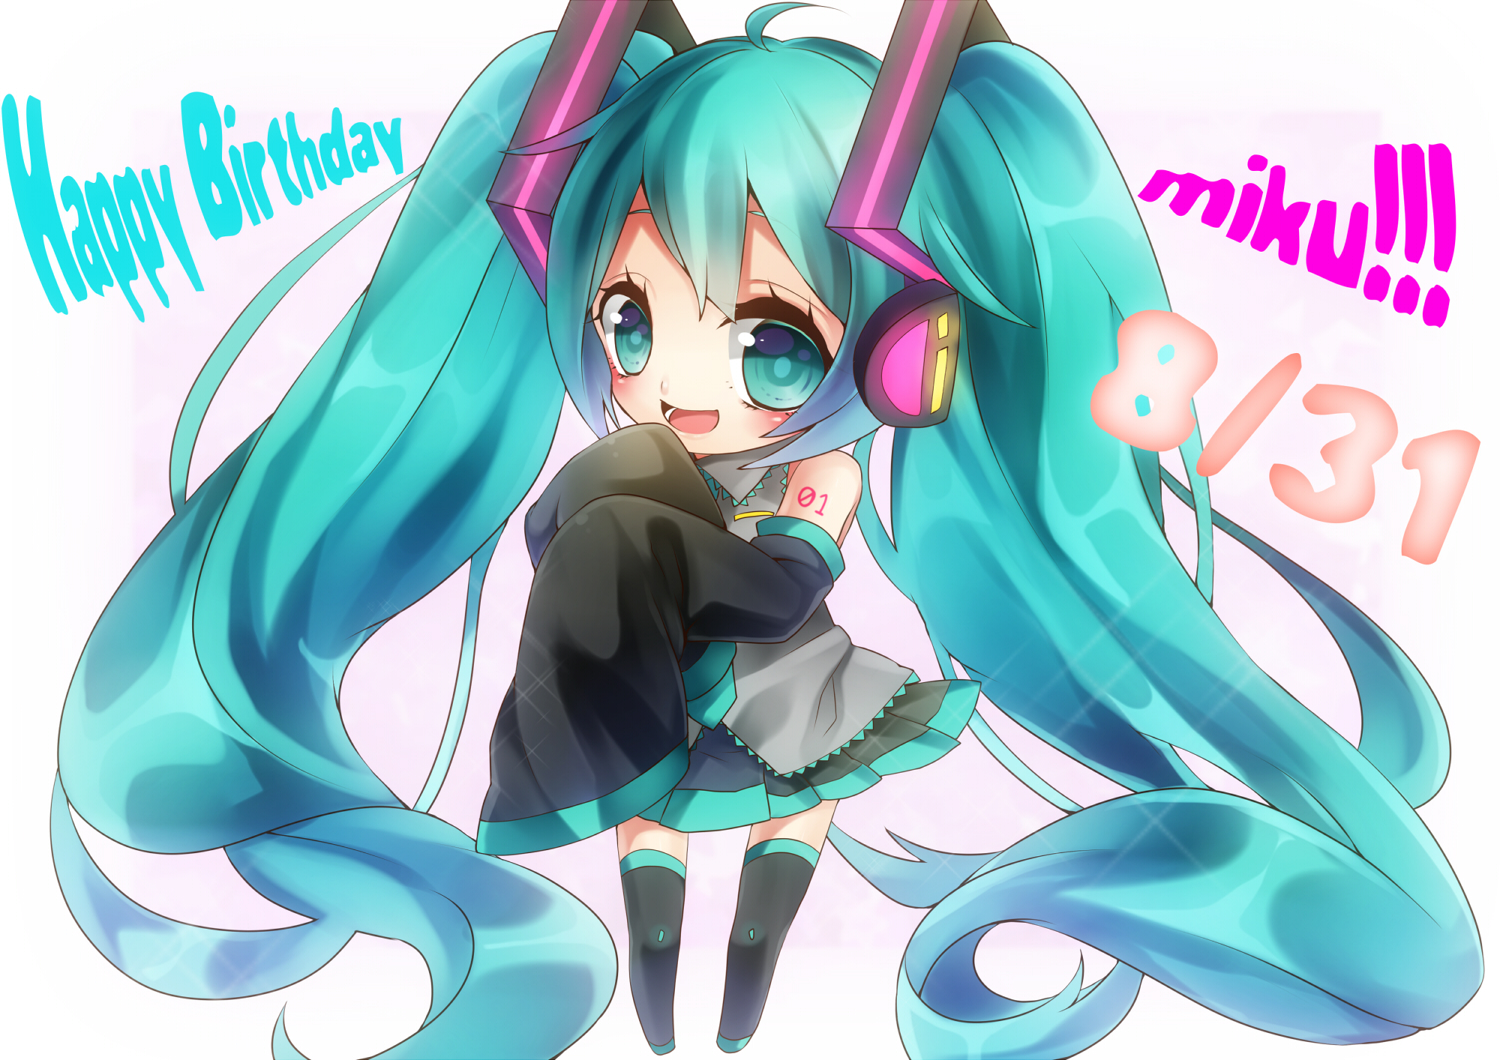  Hatsune Miku 初音ミク   I know you know Theres no such thing as  eternal happiness Even flowers wilt dont they   It was so  Instagram